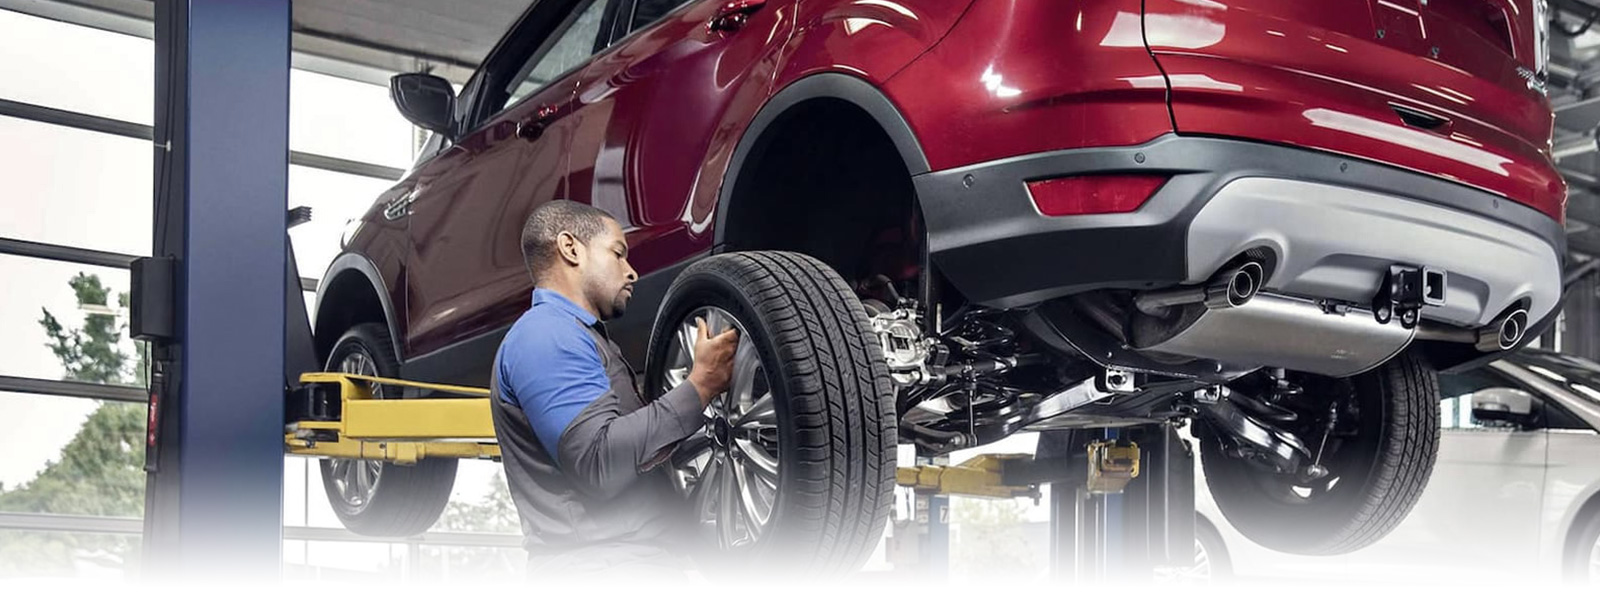 Here at Affordable Care, we can address all kinds of car-related repairs, from fixing damaged paint, straightening the entire frame of your car, and evaluating engine performance.